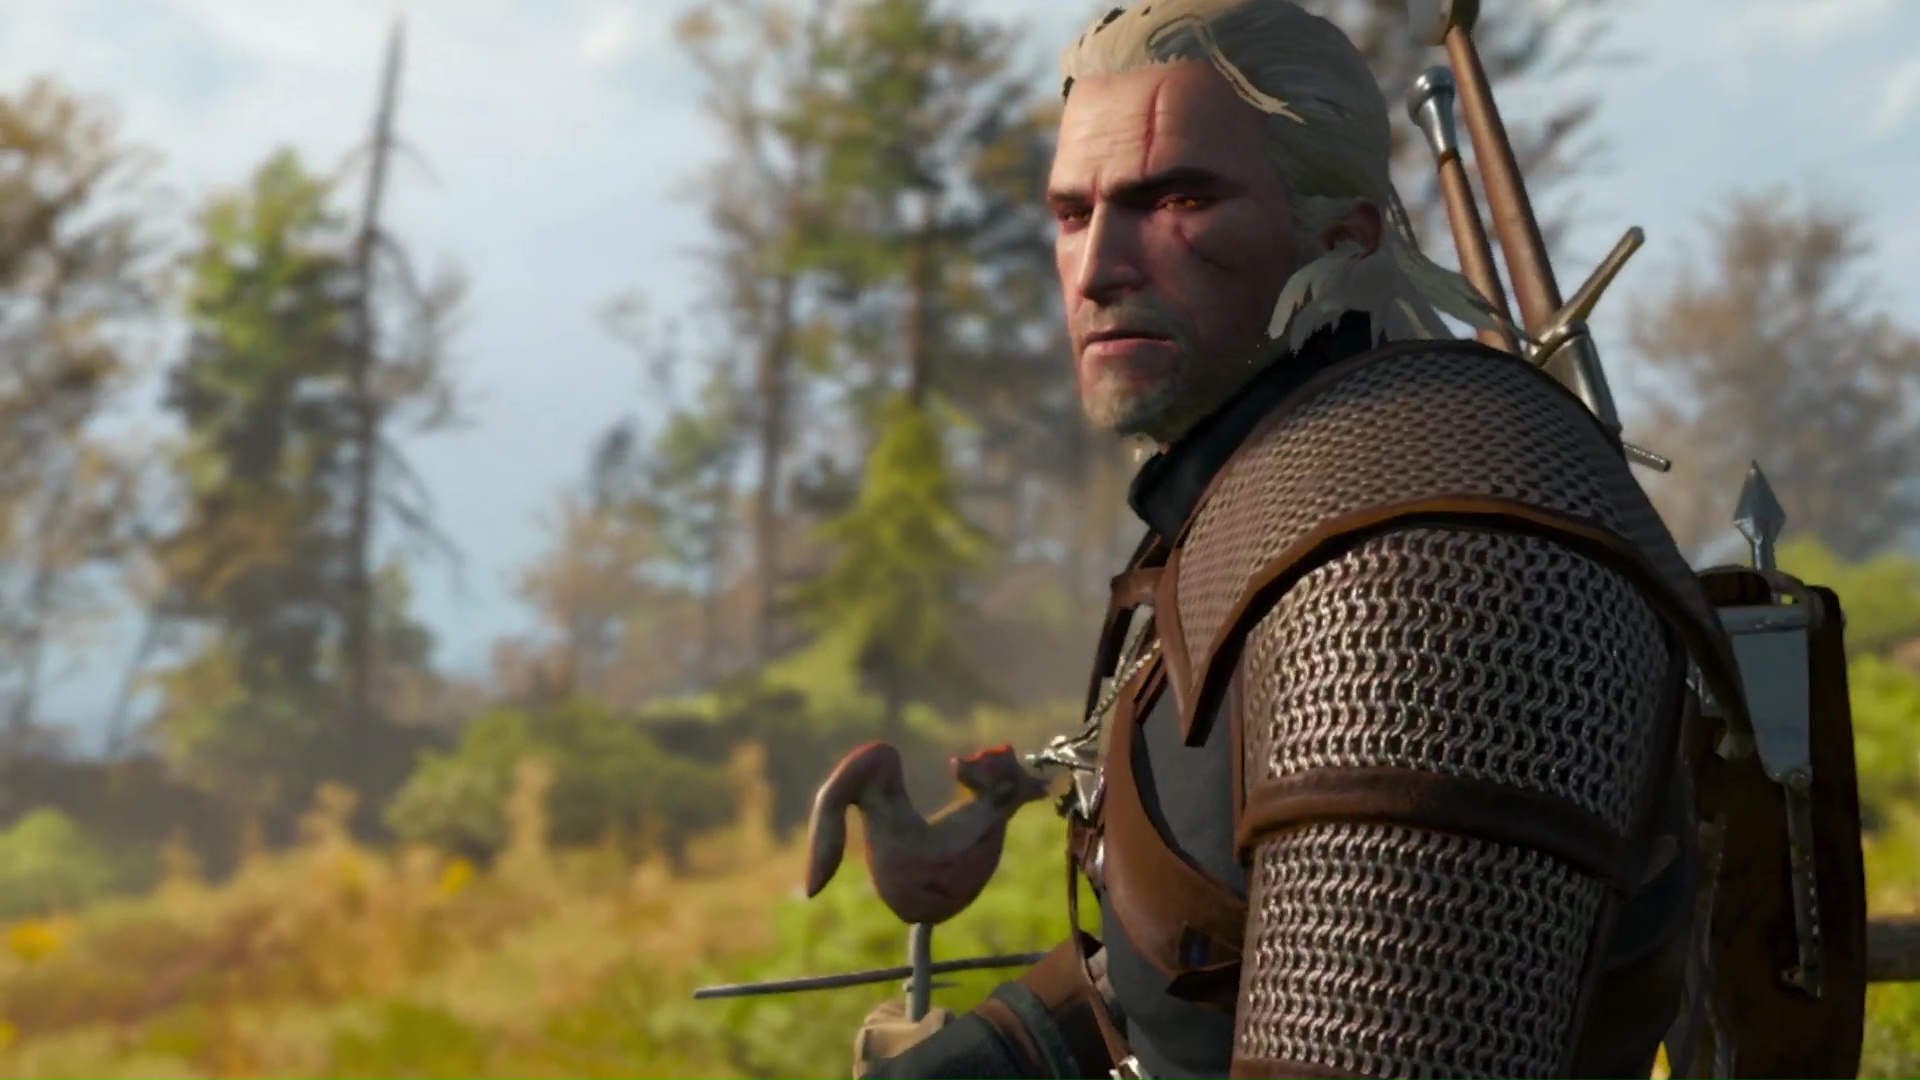 The Witcher 3 On Switch Helped Drive Cd Projekt Red’s Revenue Up 70% For First Half Of 2020